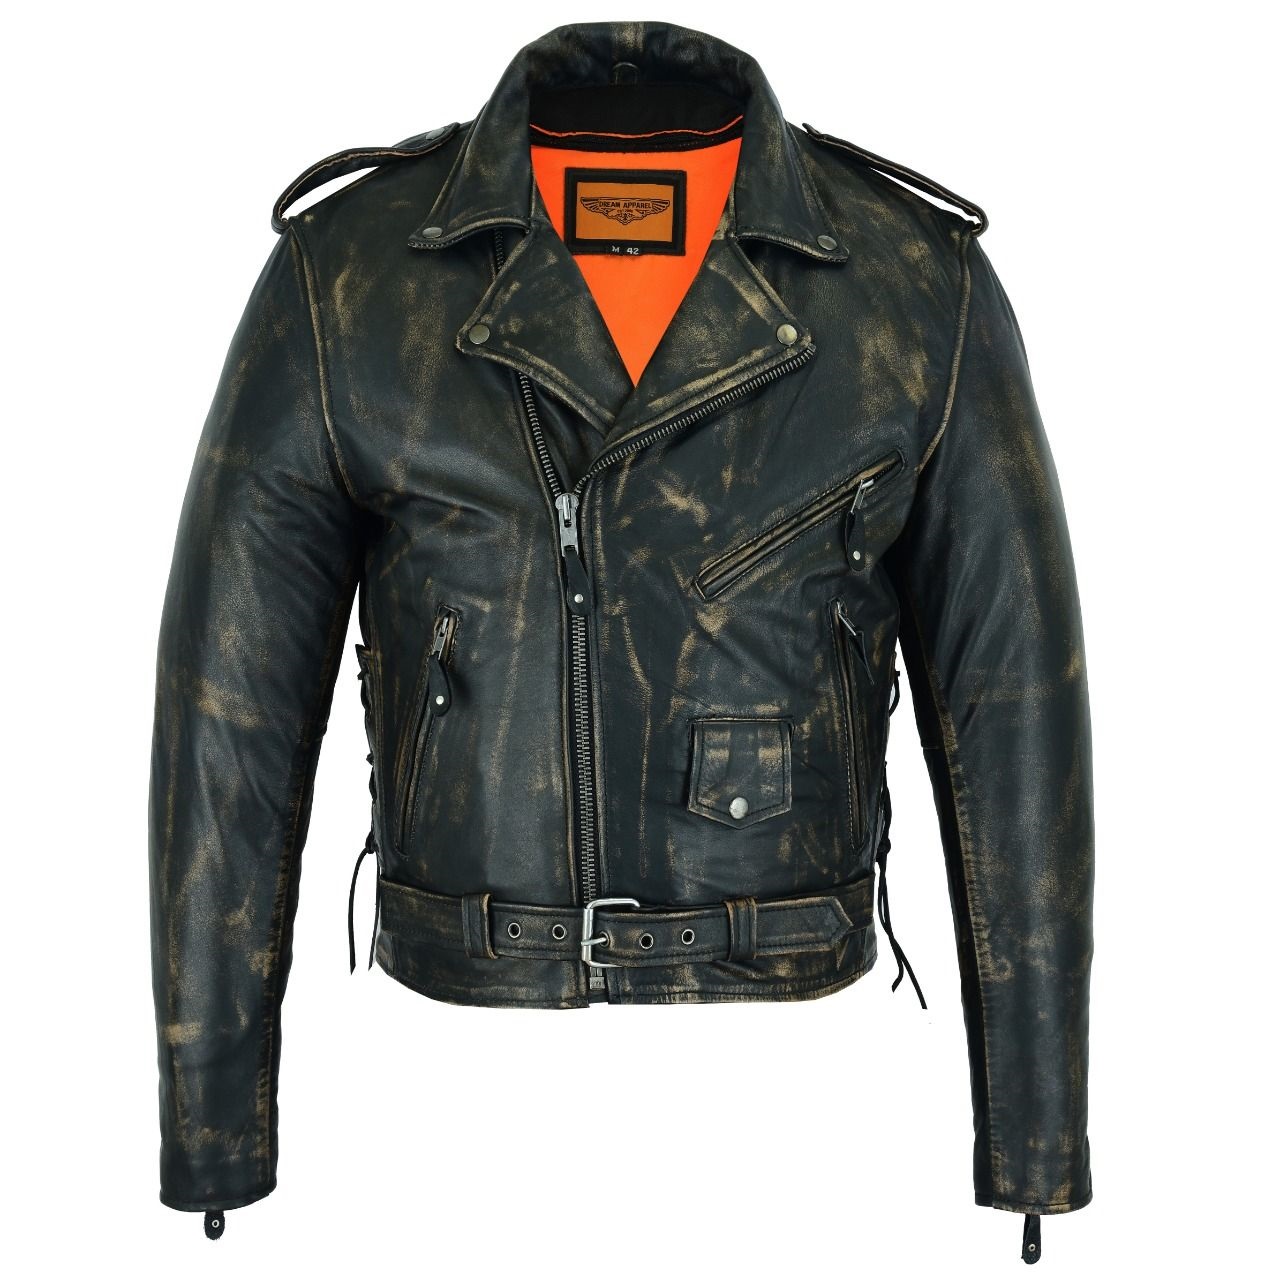 Men's Leather Jacket with Gun Pockets MJ201-12N - Open Road Leather ...